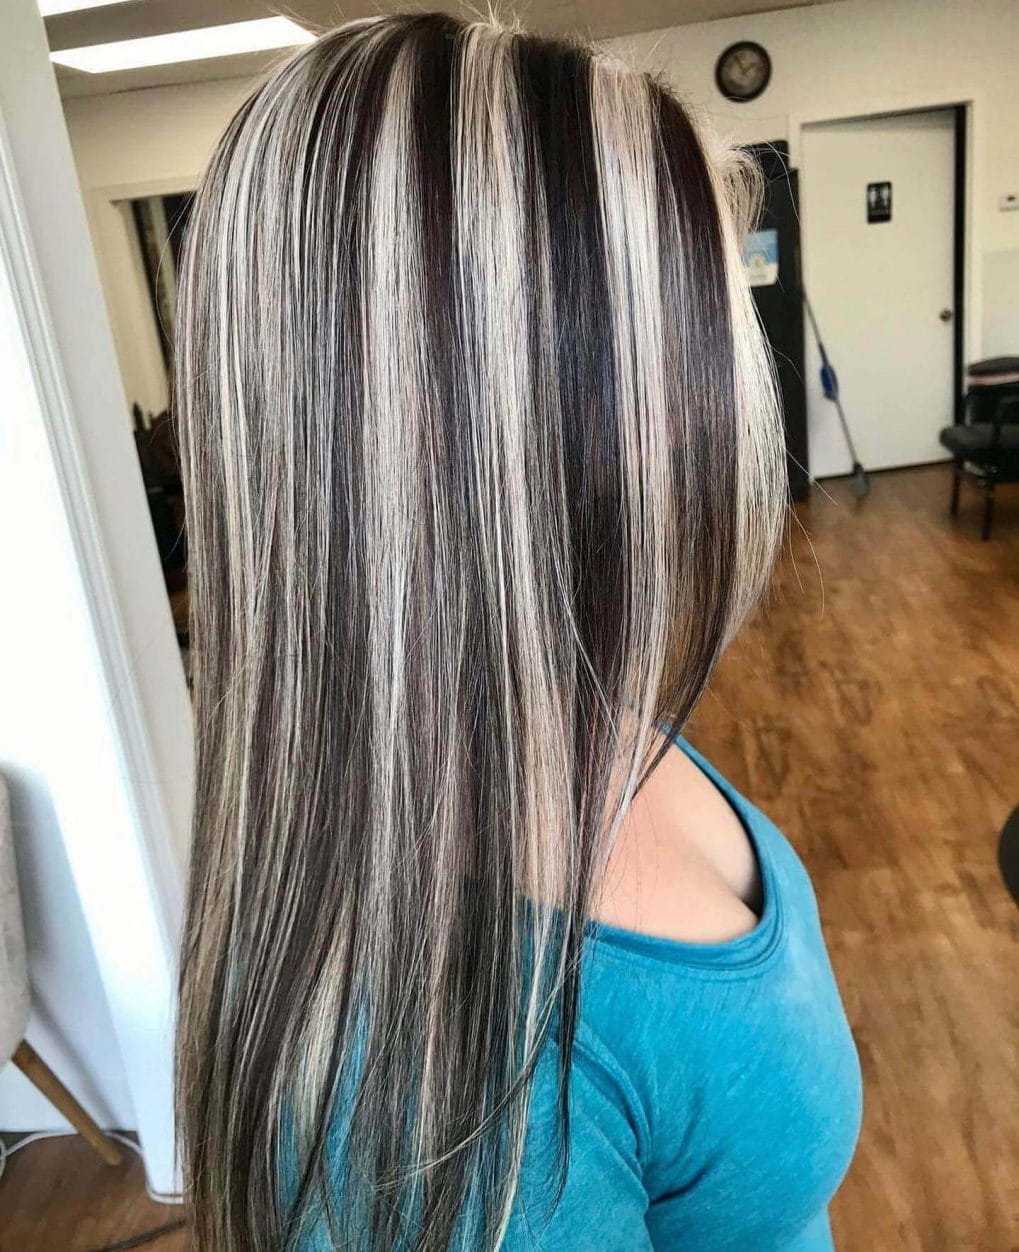 Platinum highlights through ash brown, straight long hair with subtle layers.